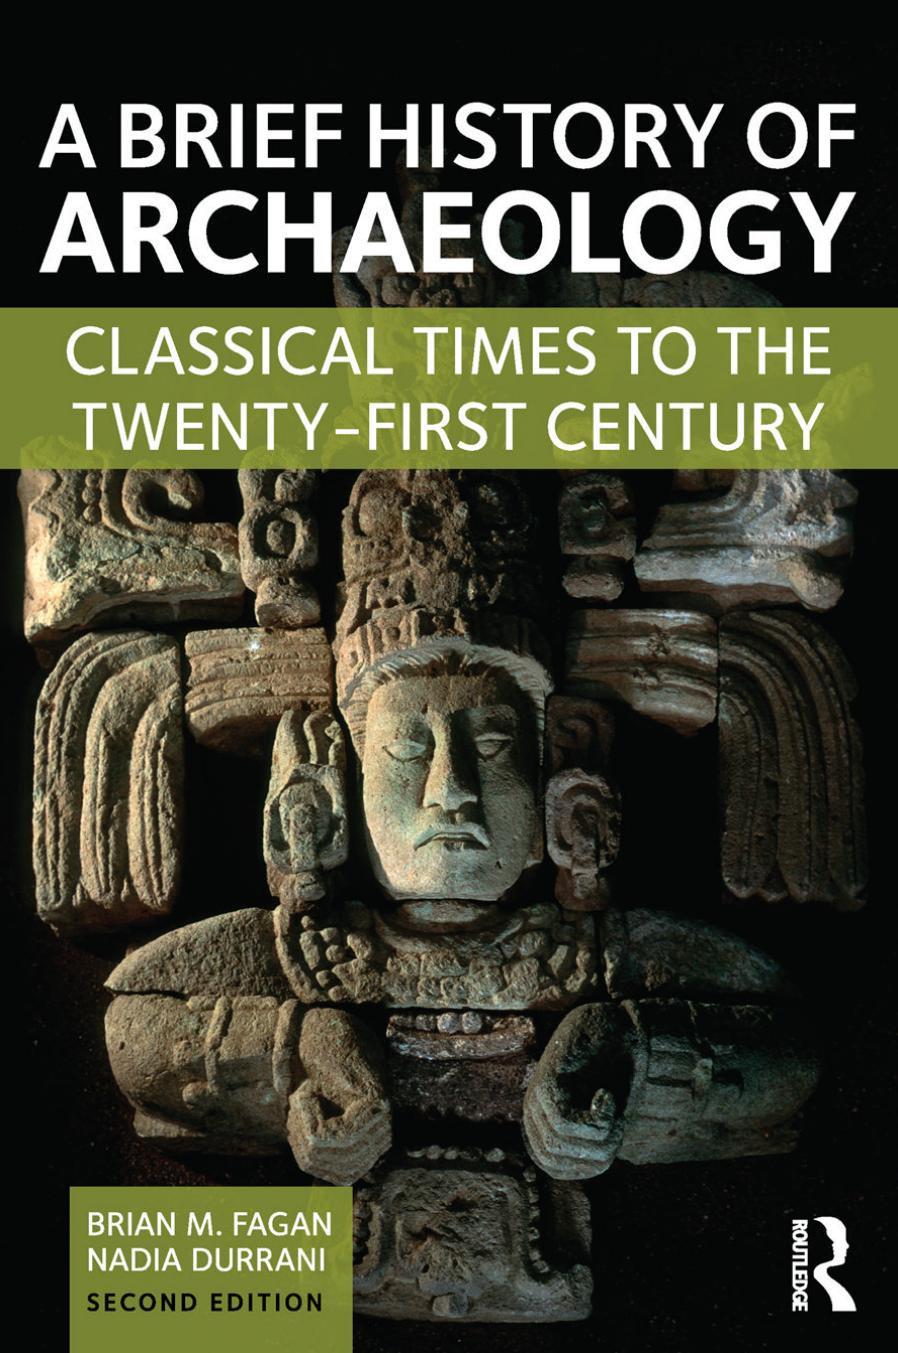 A Brief History of Archaeology: Classical Times to the Twenty-First Century